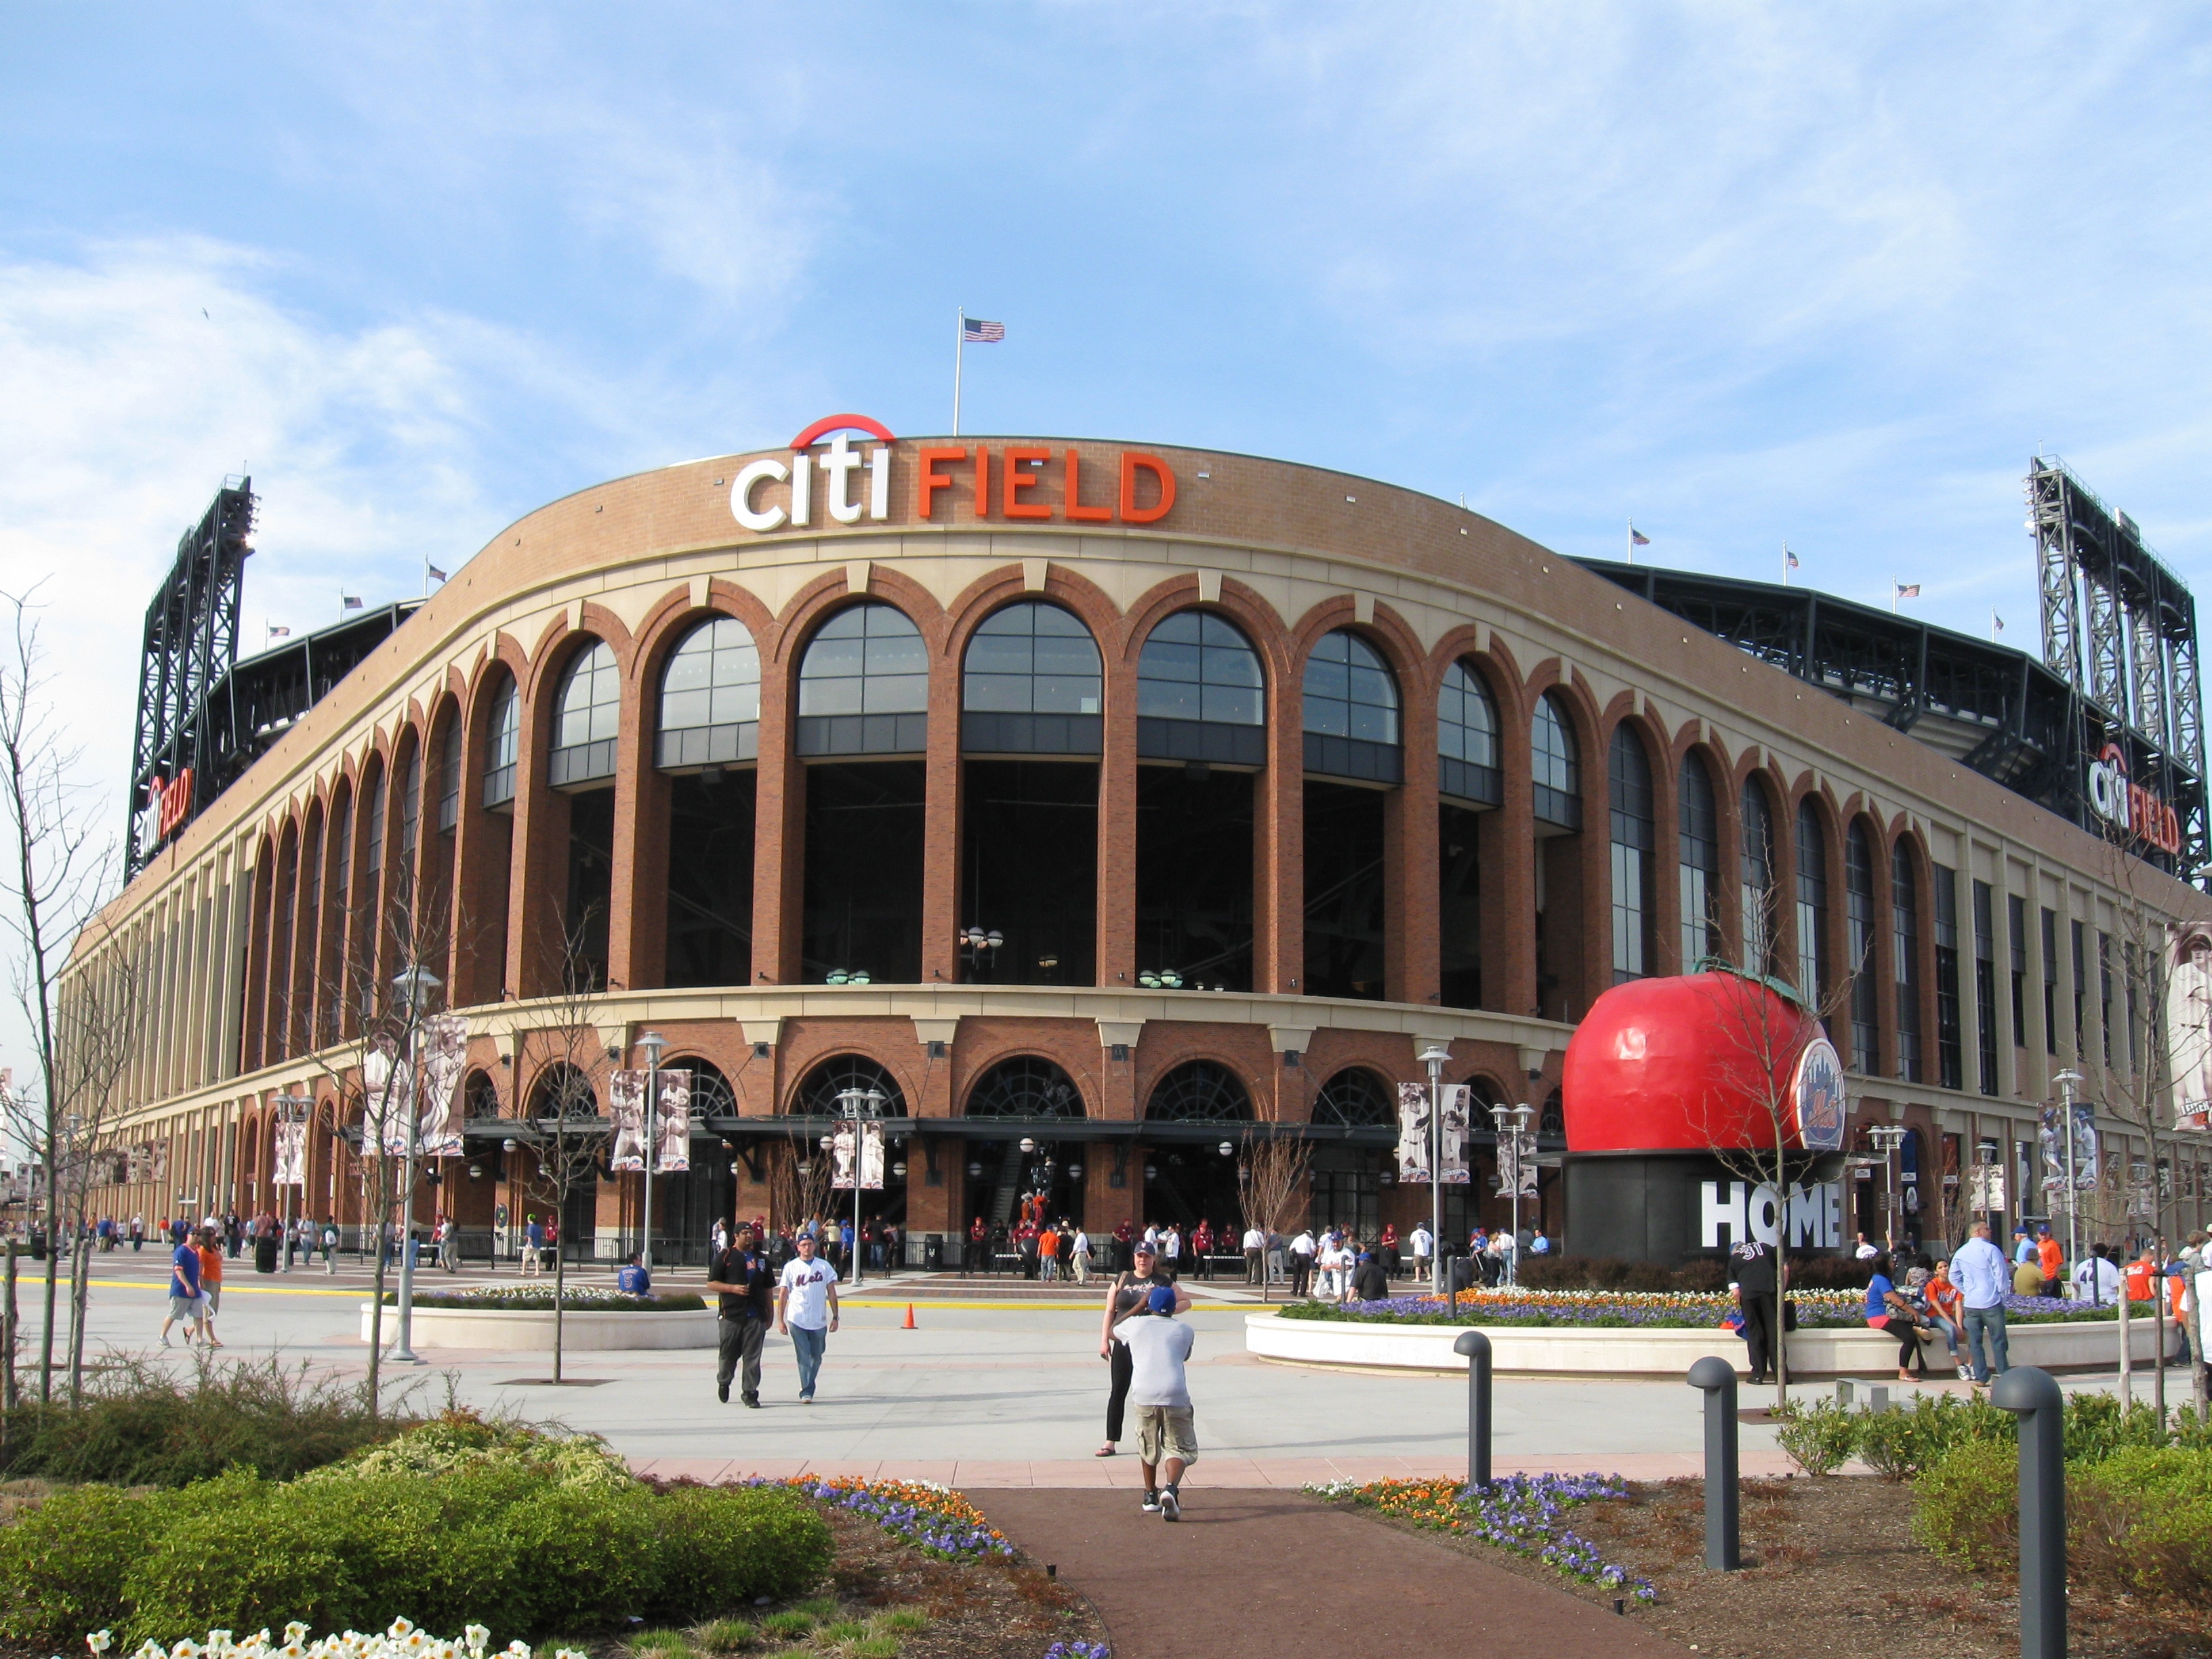 MTA Reminds New York Mets Fans Ahead of Home Opener that Mass Transit is the Best Way to Get to Citi Field 